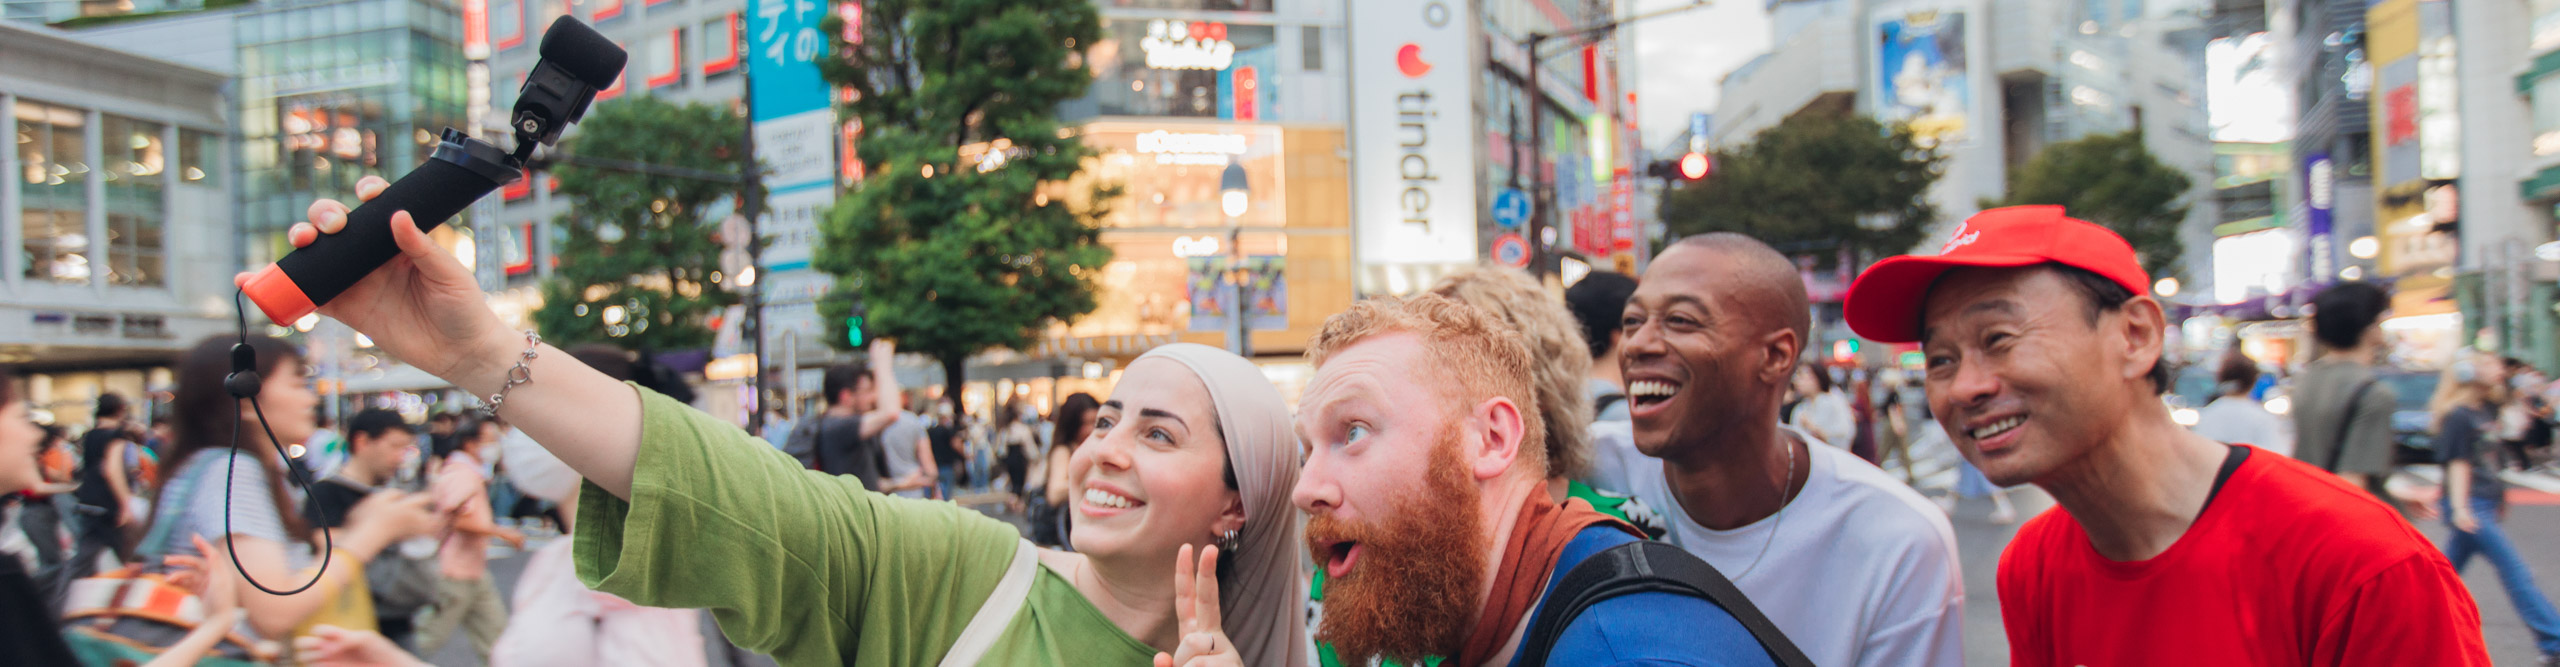 Group taking a selfie on a busy street in Tokyo with signs and bright lights in the background 